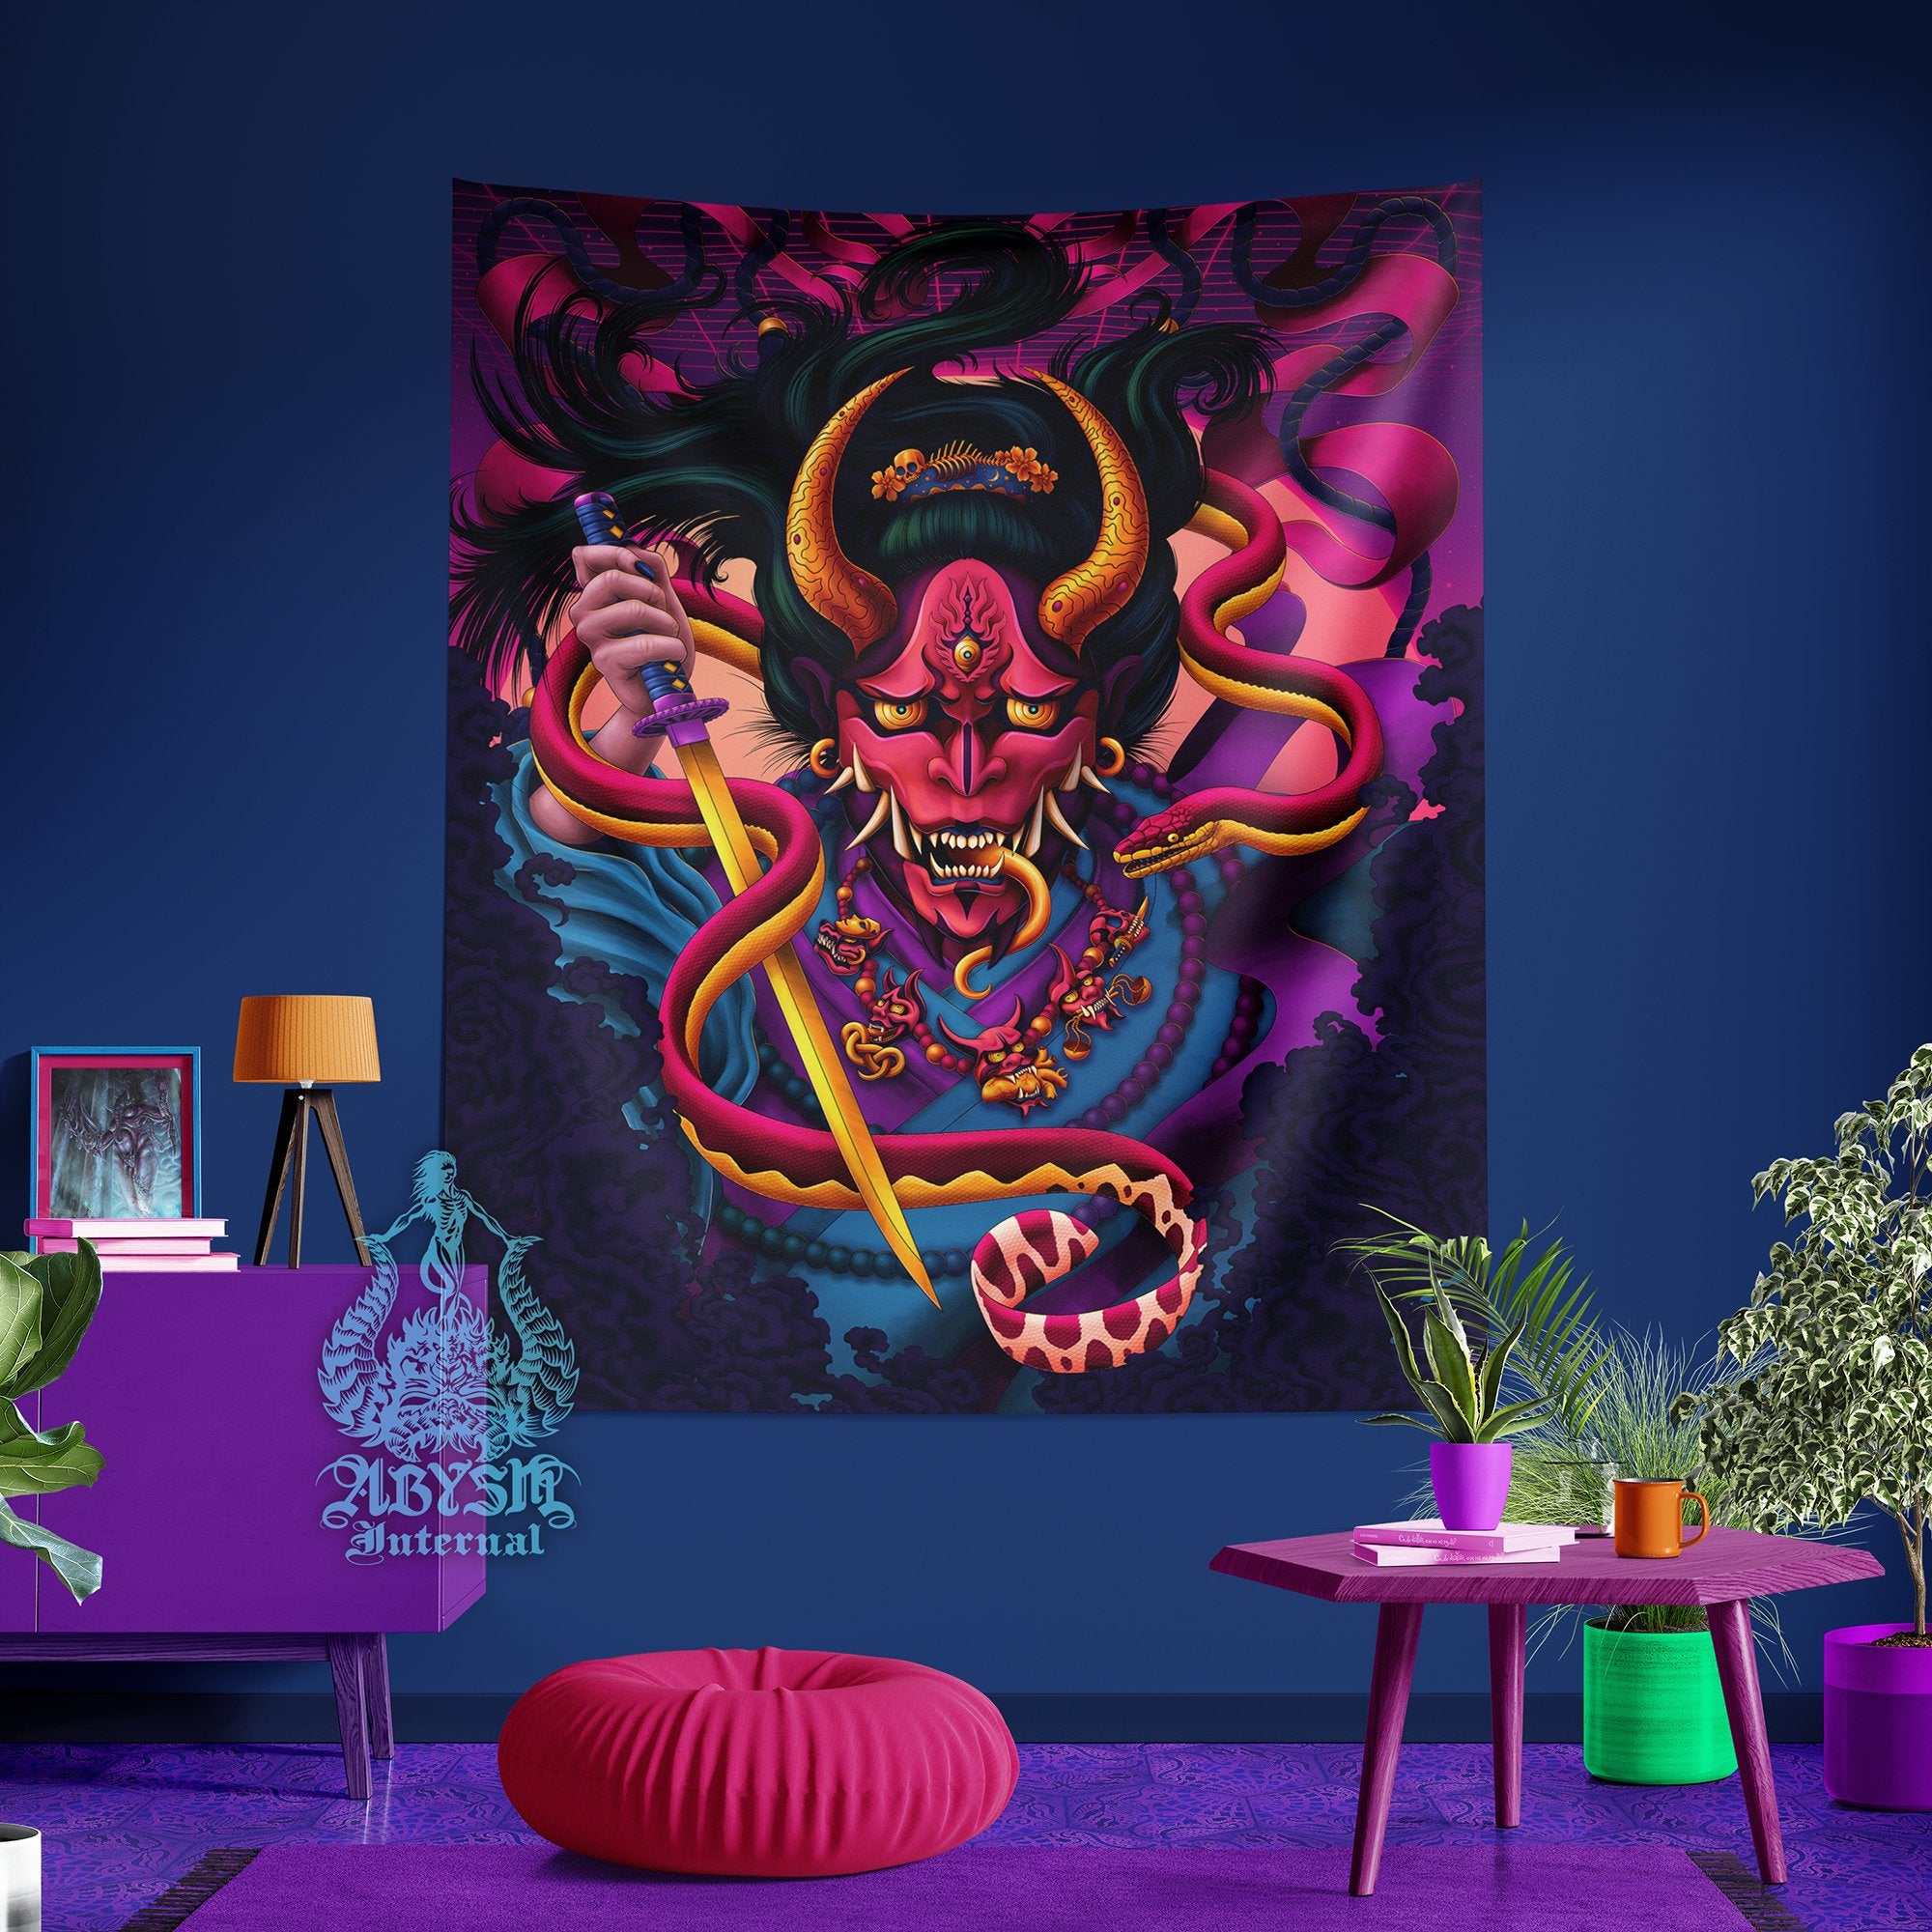 Psychedelic Demon Tapestry, Japanese Hannya and Snake Wall Hanging, Trippy Manga, Anime and Gamer Room Decor, Vertical Art Print - Vaporwave - Abysm Internal